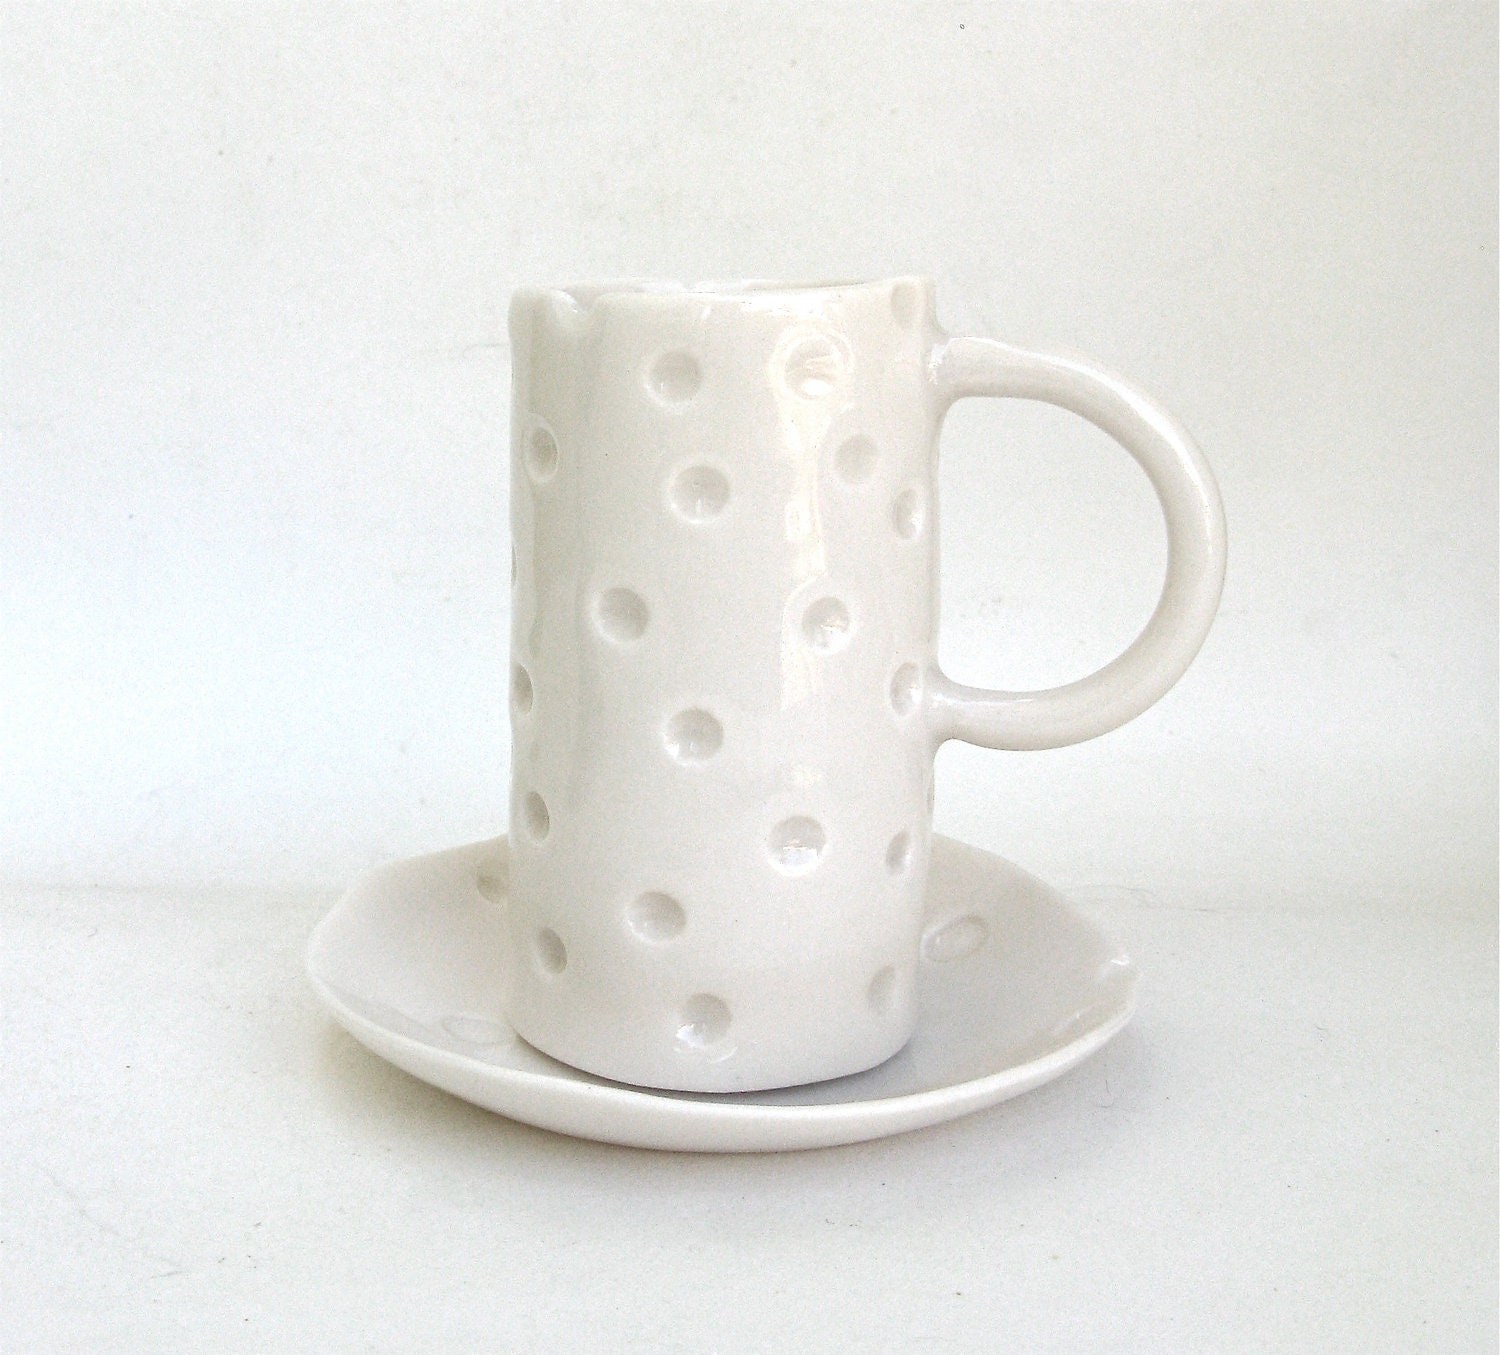 hand built translucent porcelain cup and dish - lynswan